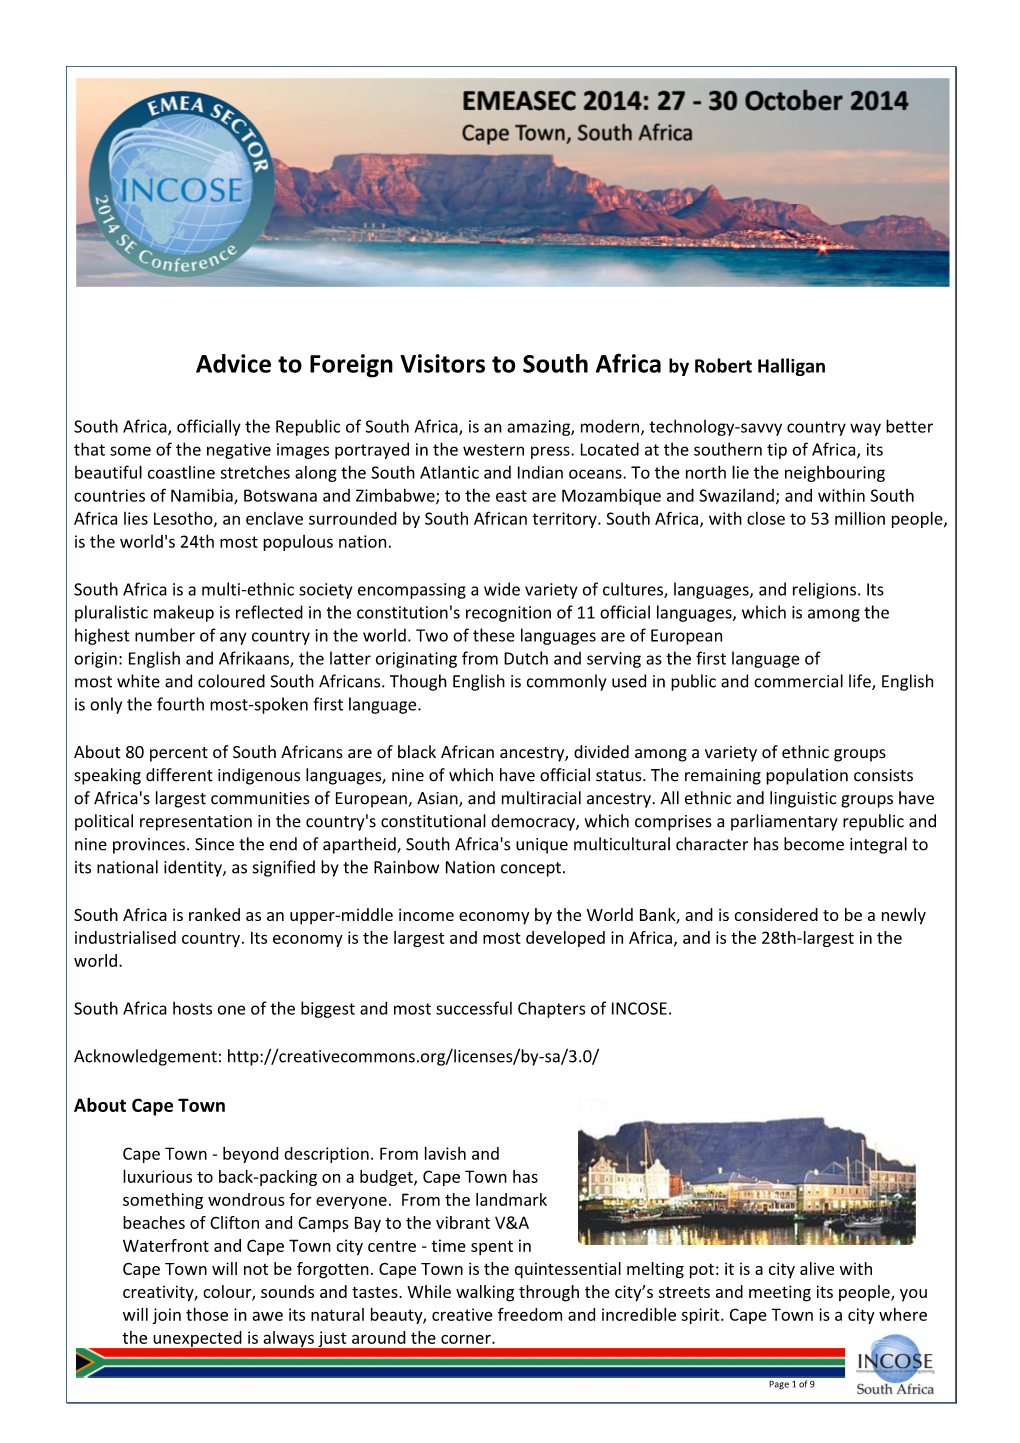 Advice to Foreign Visitors to South Africa by Robert Halligan